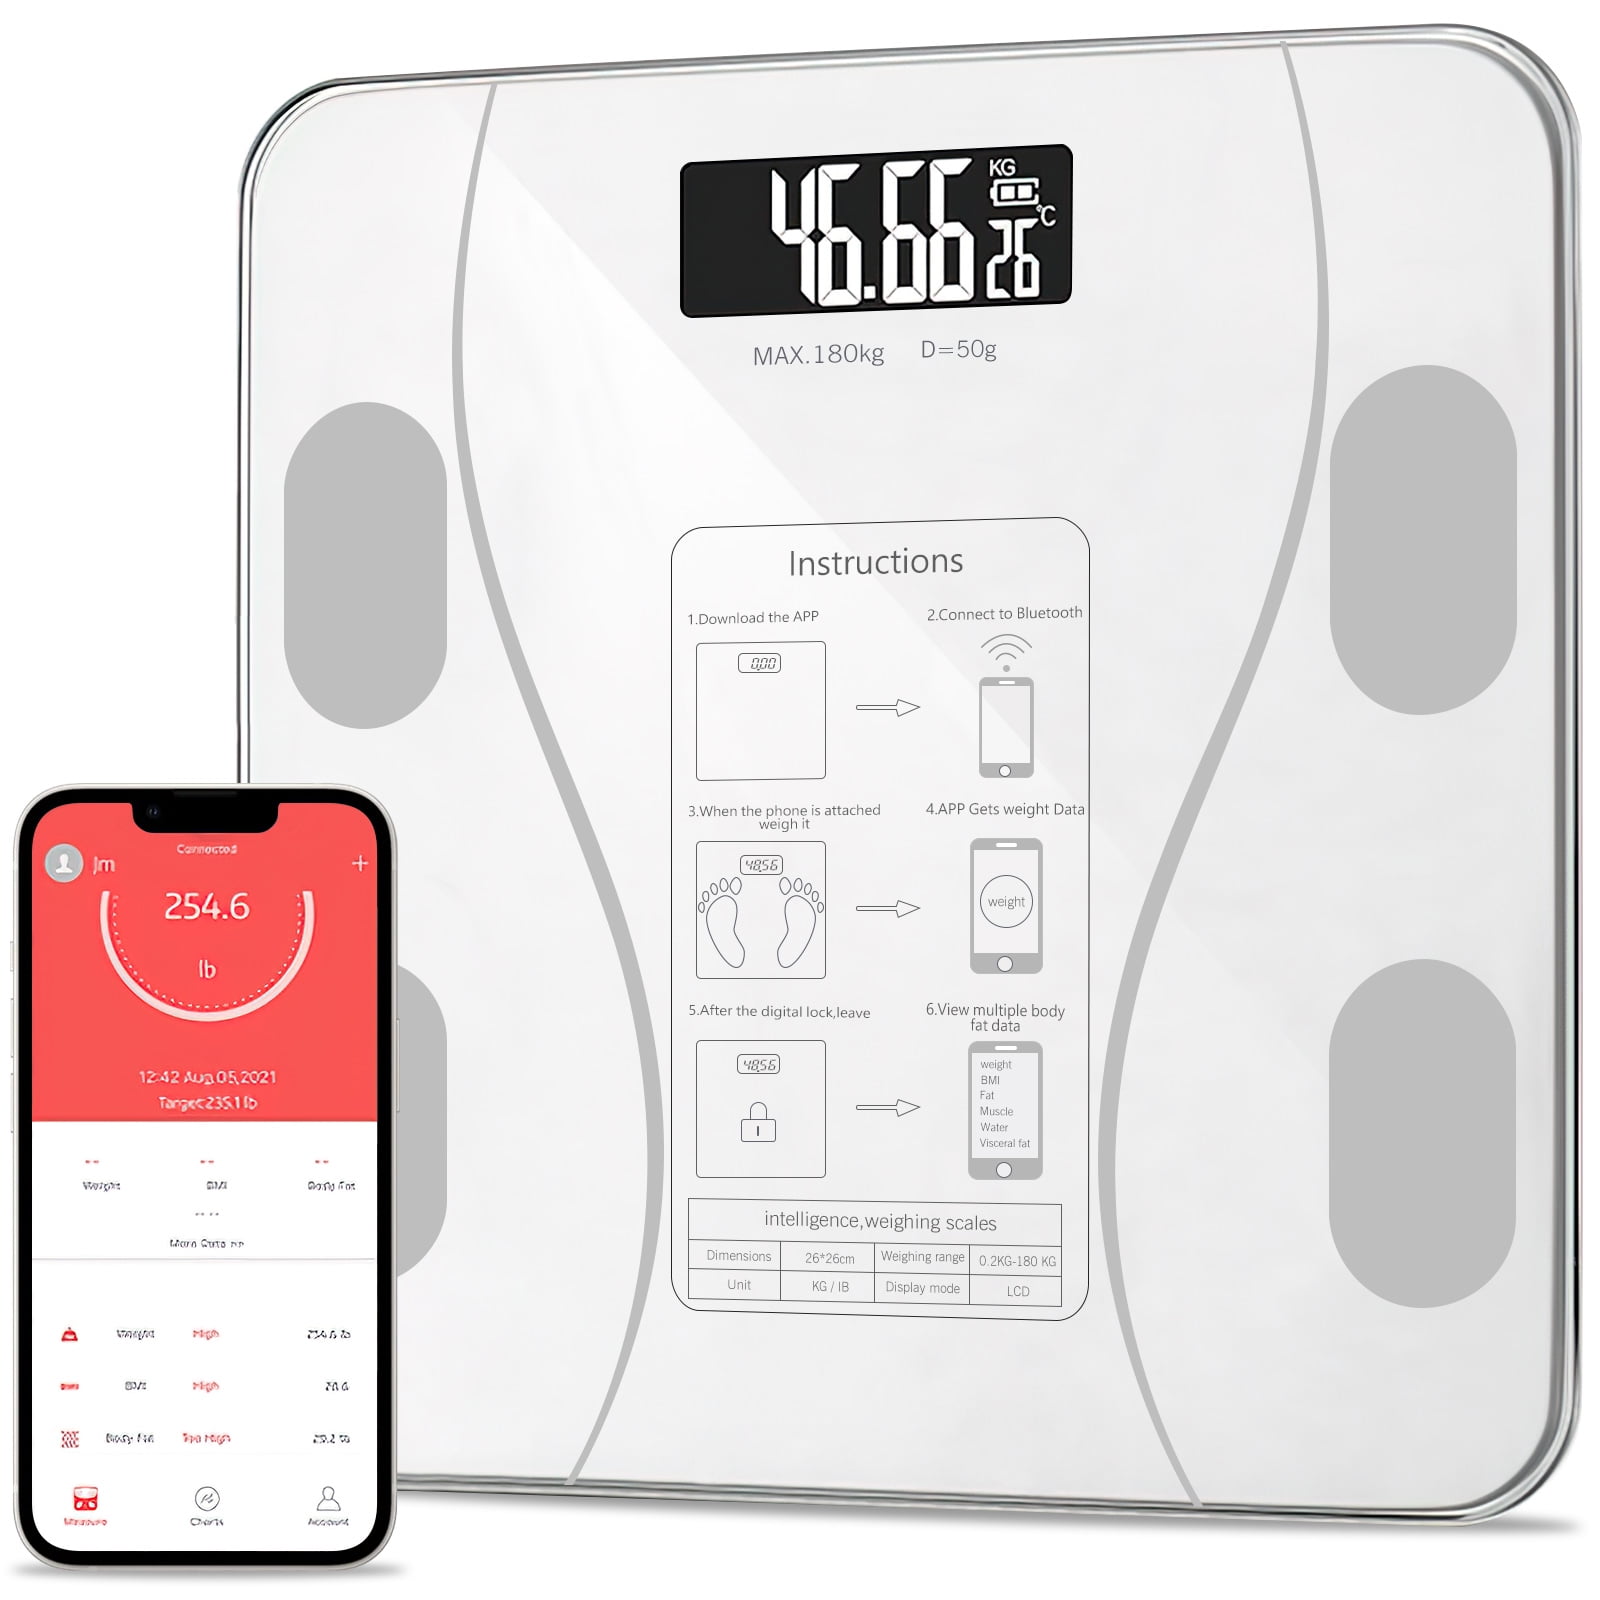 Bisonbody Smart Digital Scale for Body Weight and Fat Percentage, 22 B –  BisonBody